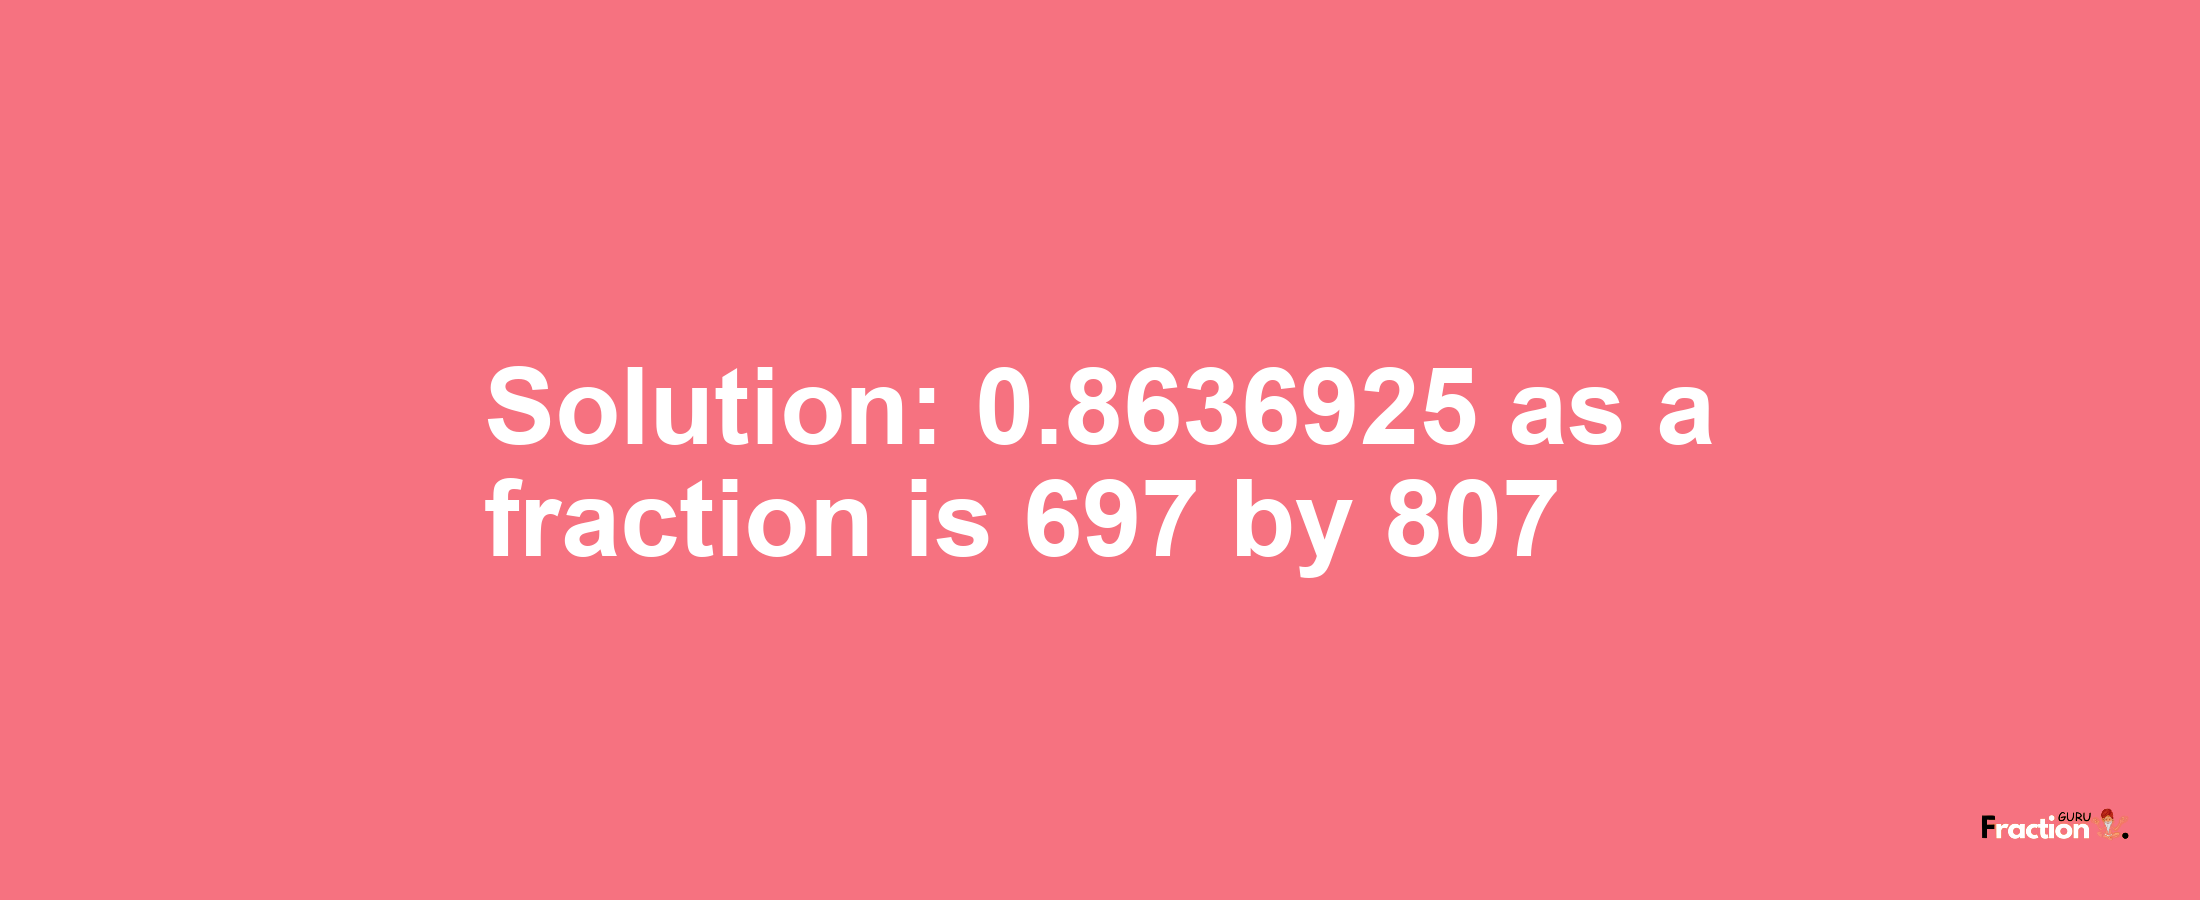 Solution:0.8636925 as a fraction is 697/807